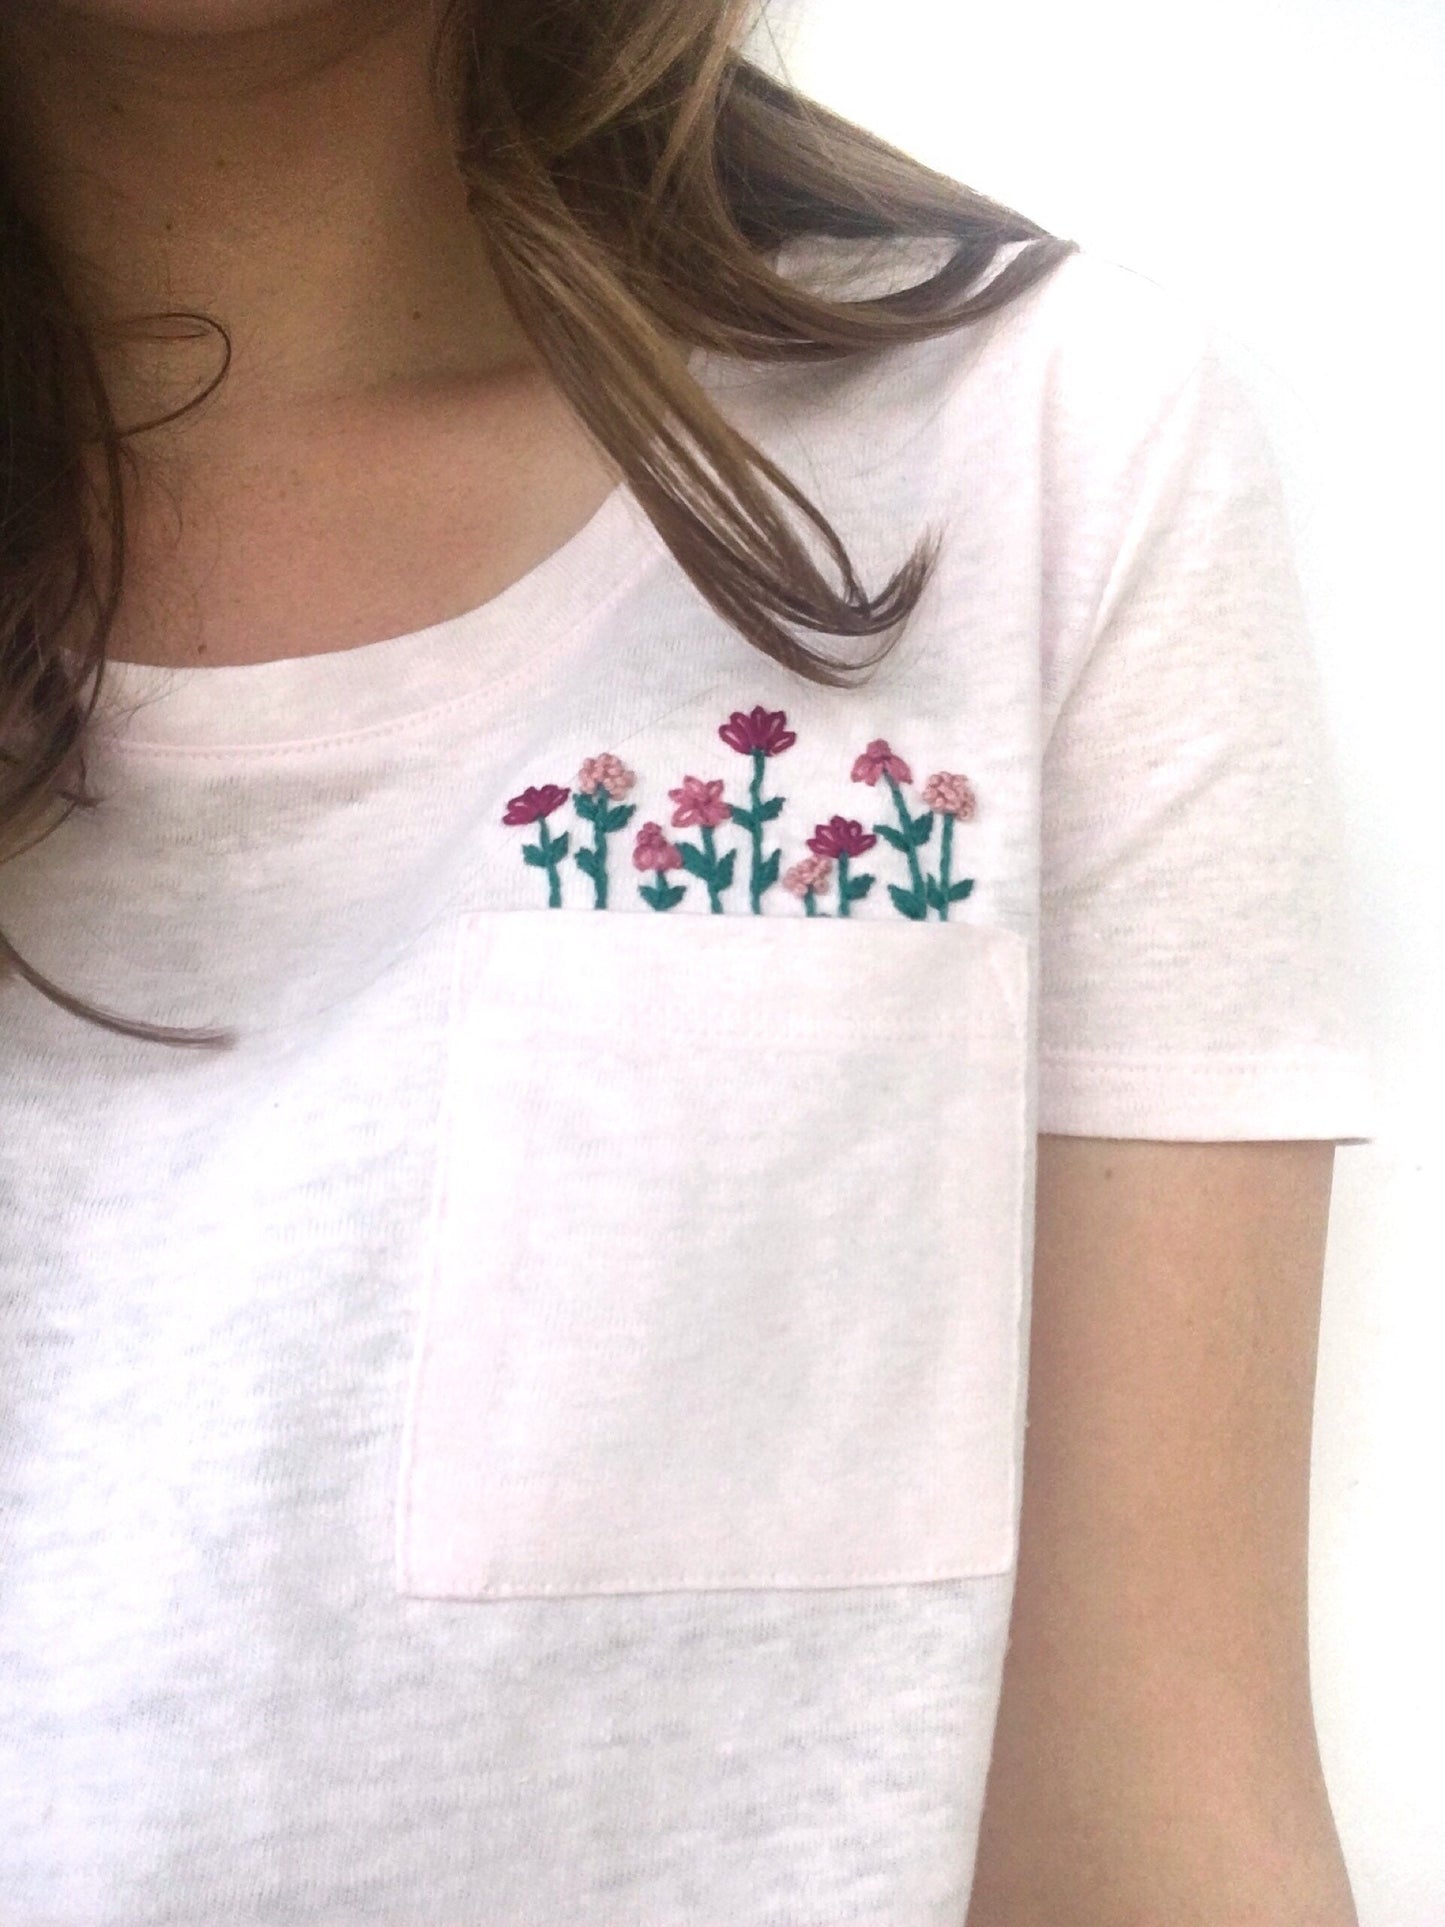 Pocket Full of Posies PDF Embroidery Pattern